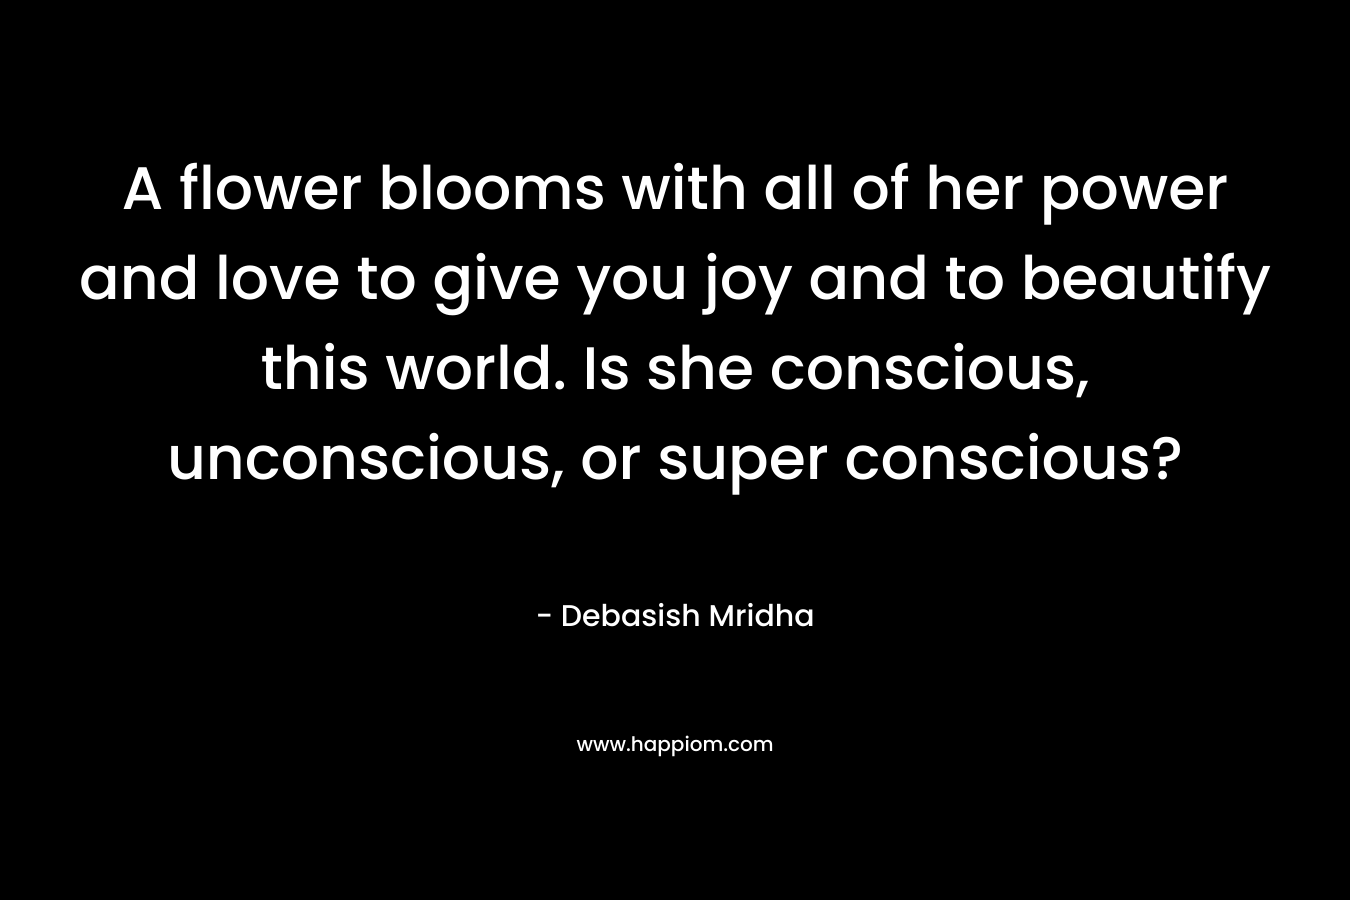 A flower blooms with all of her power and love to give you joy and to beautify this world. Is she conscious, unconscious, or super conscious?